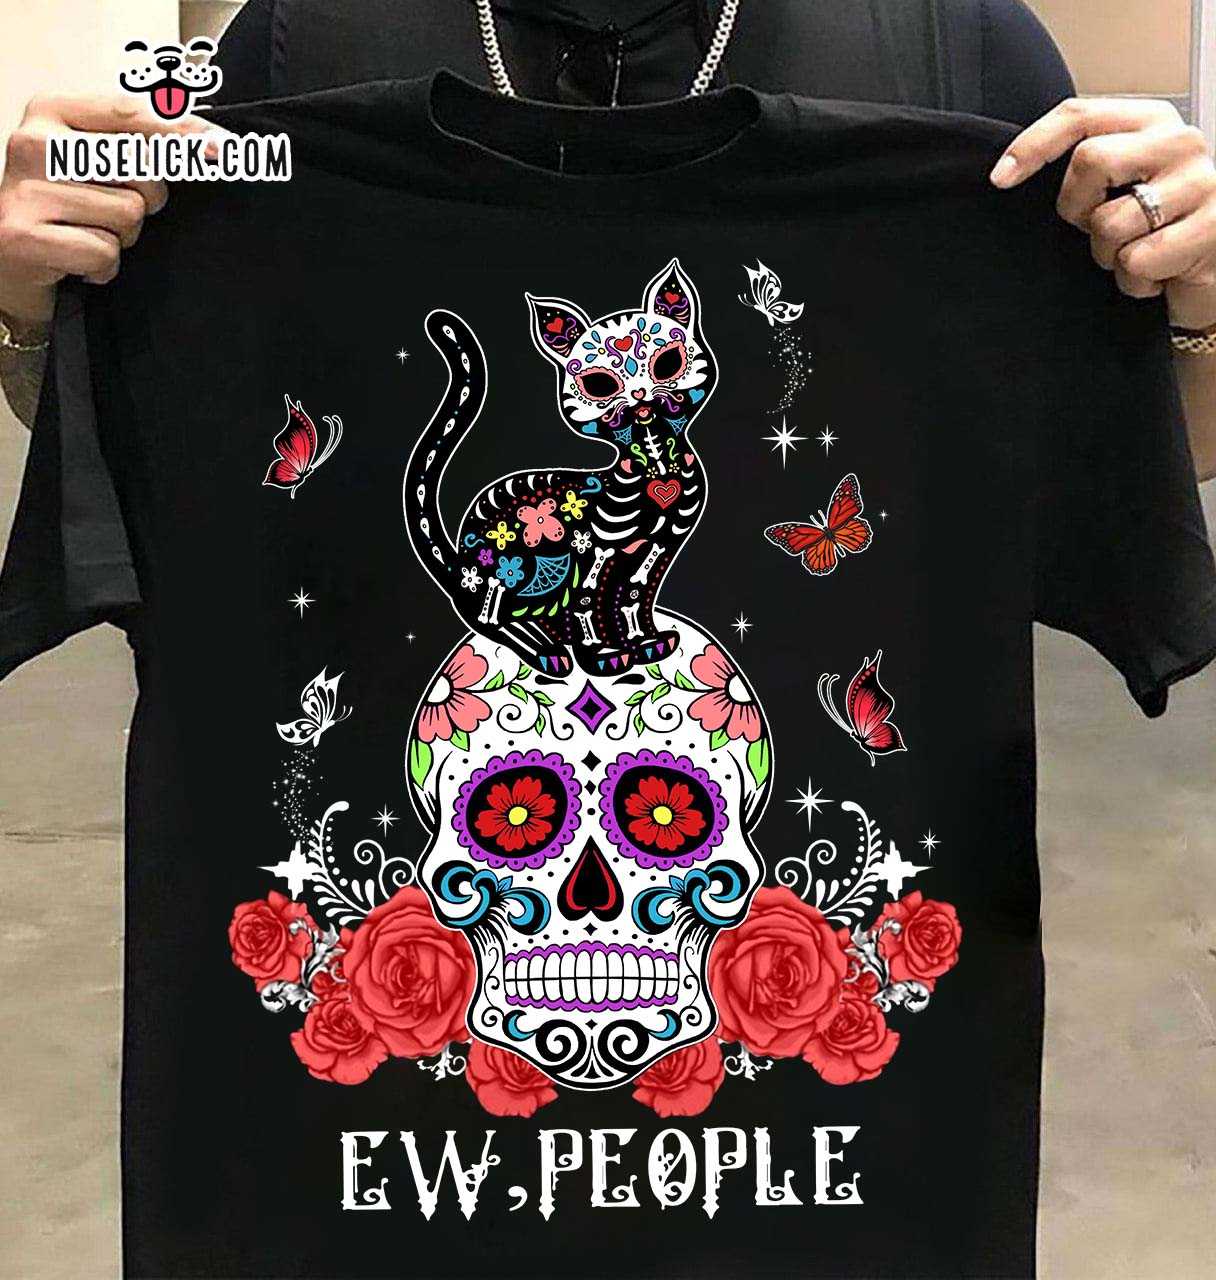 Ew people - Hate seeing people, Mexican skull and cat